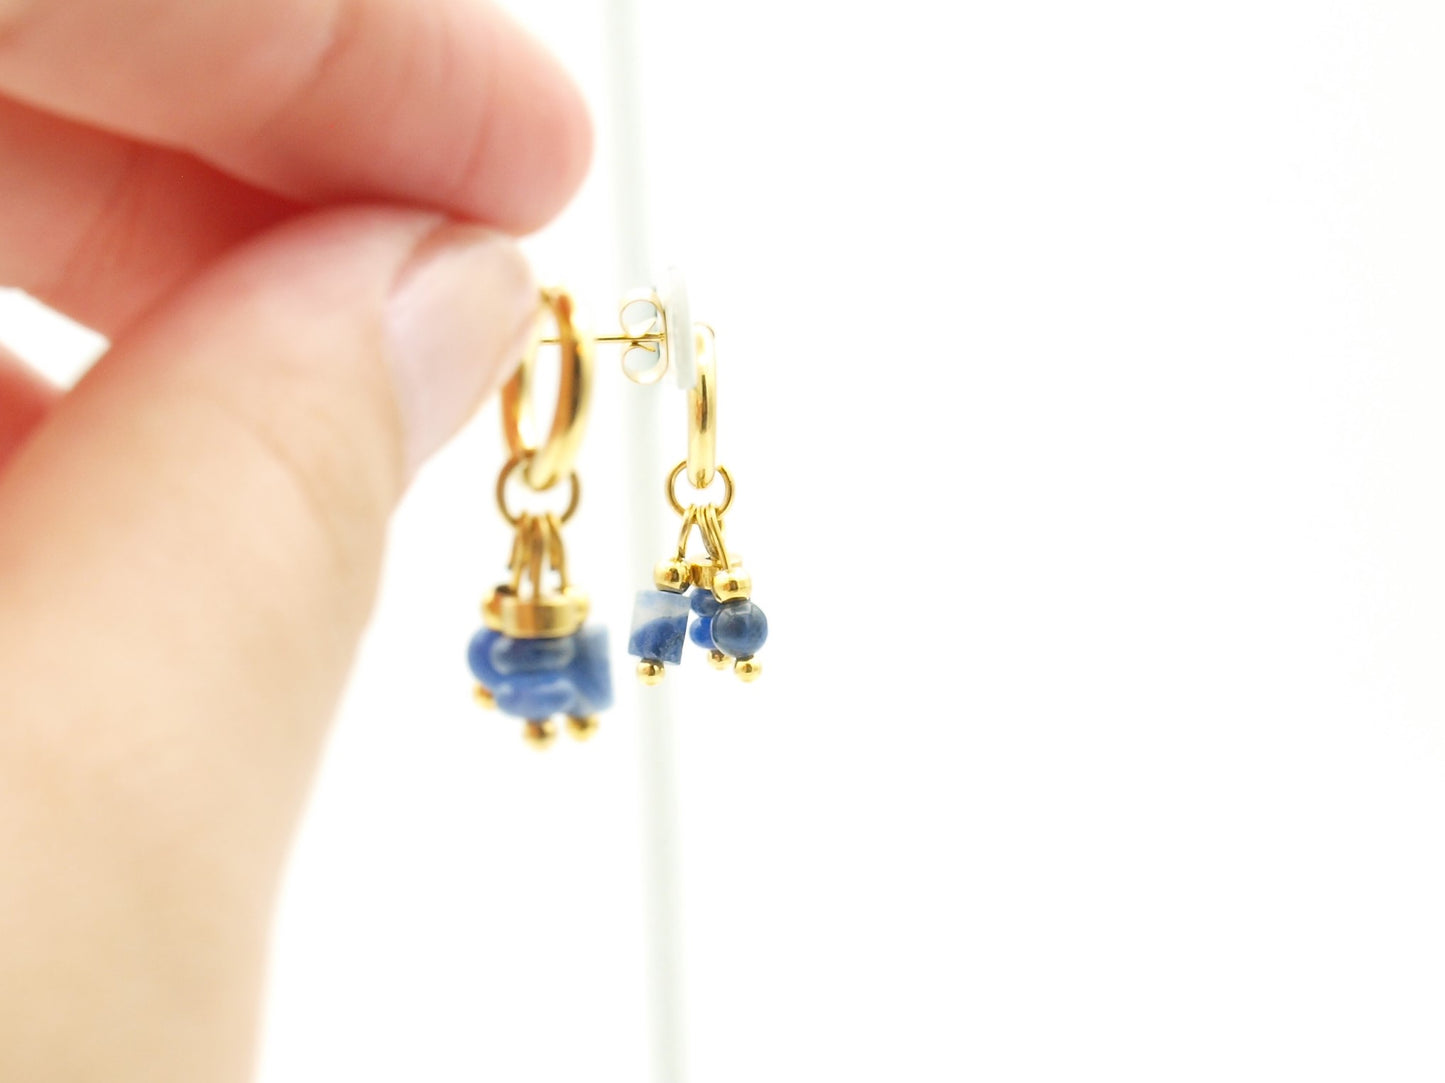 Earrings Nani sodalite, silver or gold stainless steel